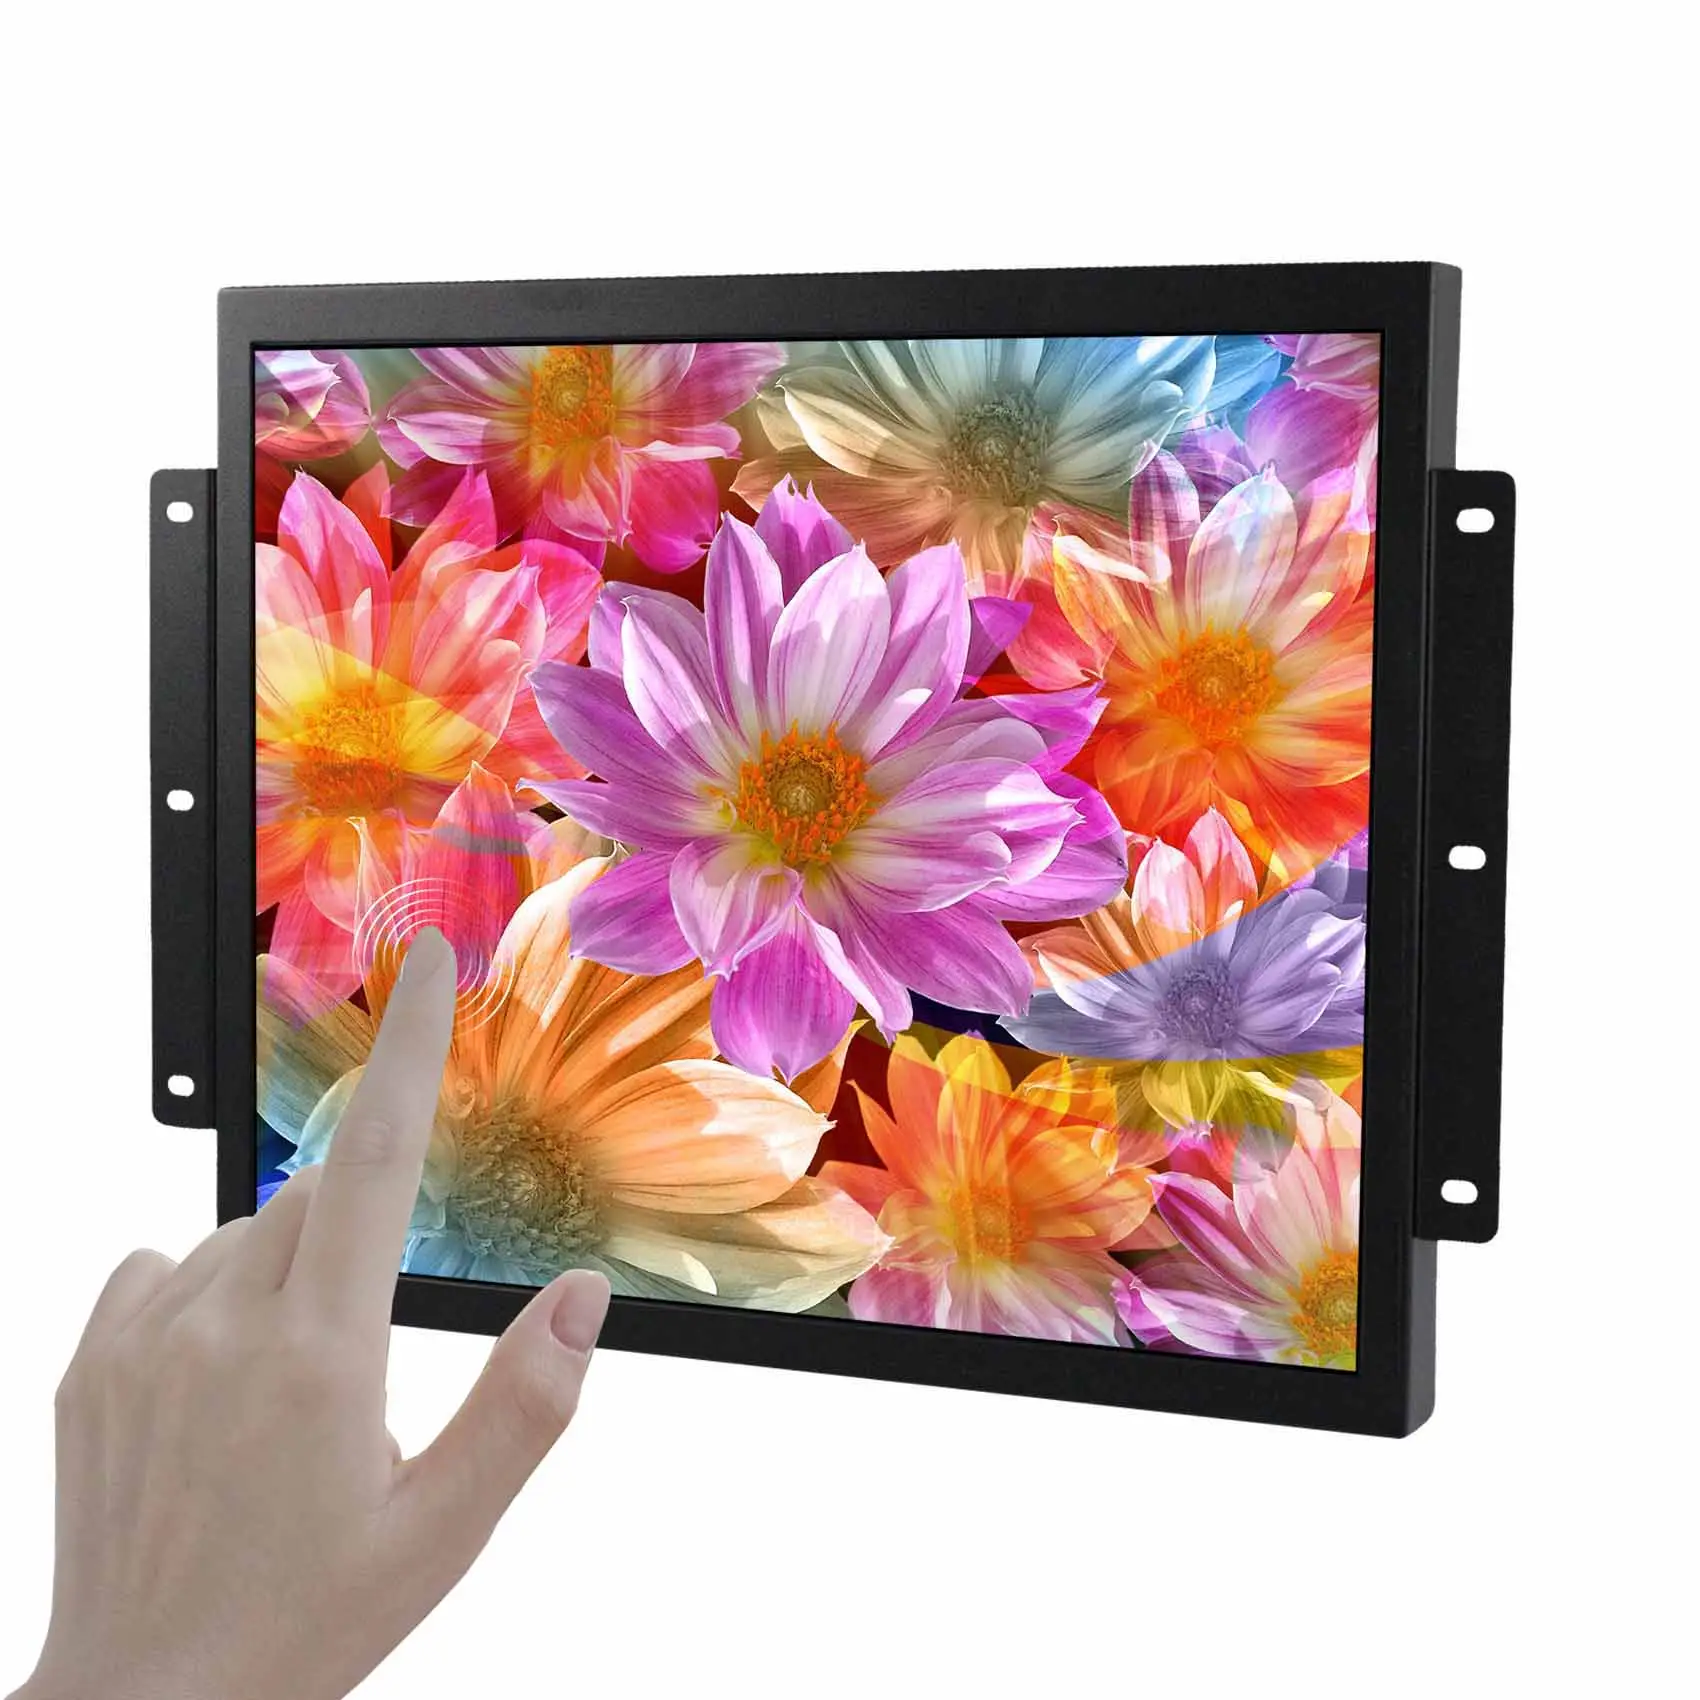 Hd-Mi Portable Monitor 17 Inch Resistive Industrial Touch Screen Monitor 17 Inch 1280X1024 1000Nit Hight Brightness Lcd Monitor